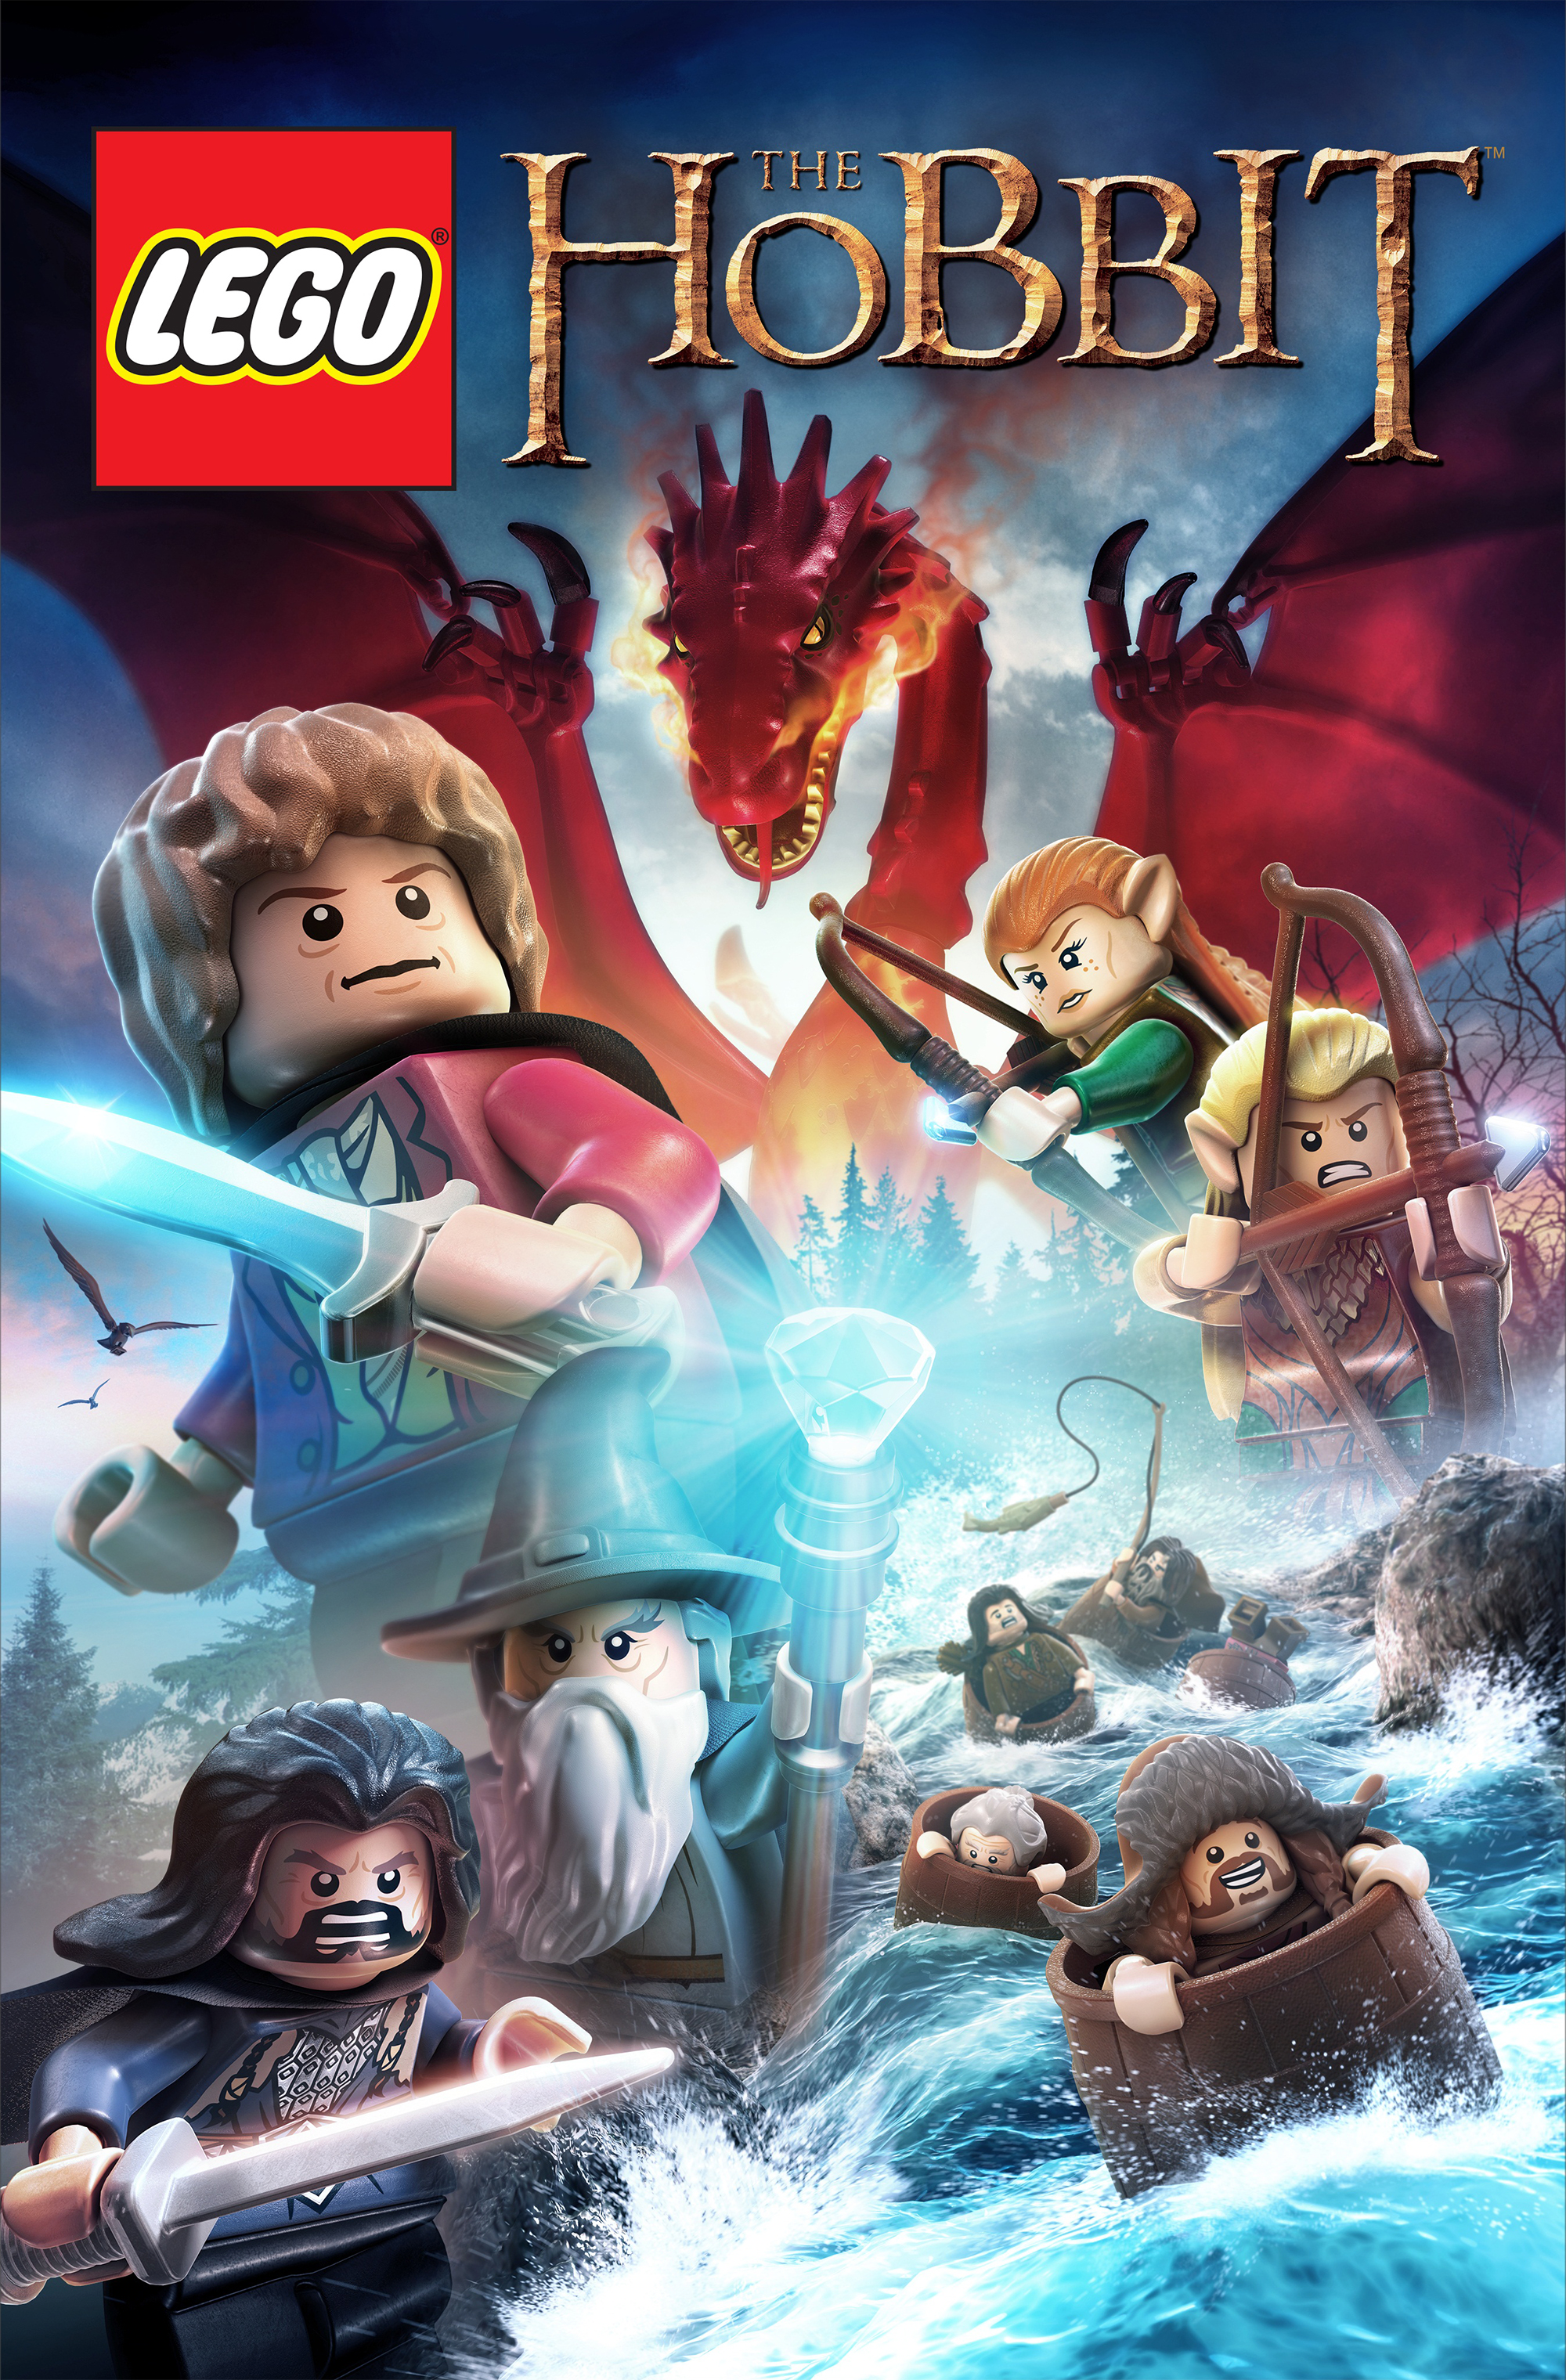 HQ LEGO The Hobbit Wallpapers | File 4193.08Kb